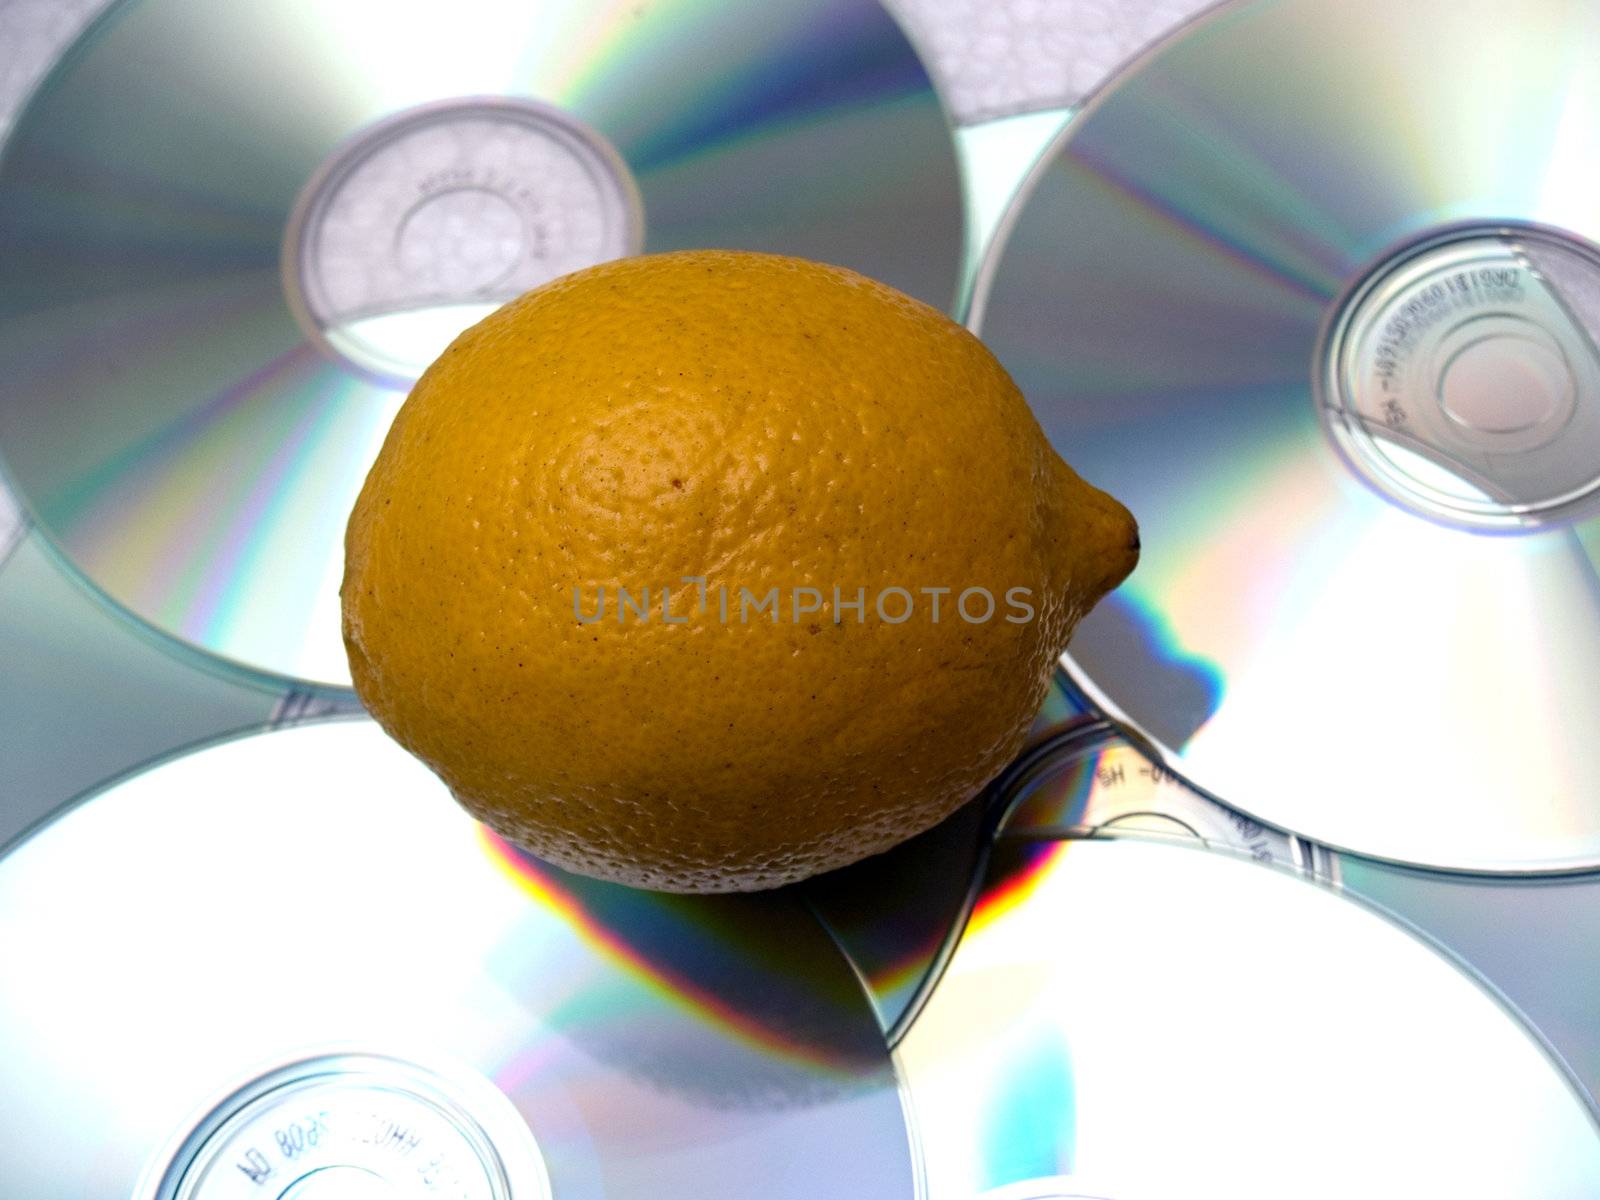 lemon and cds. by lauria